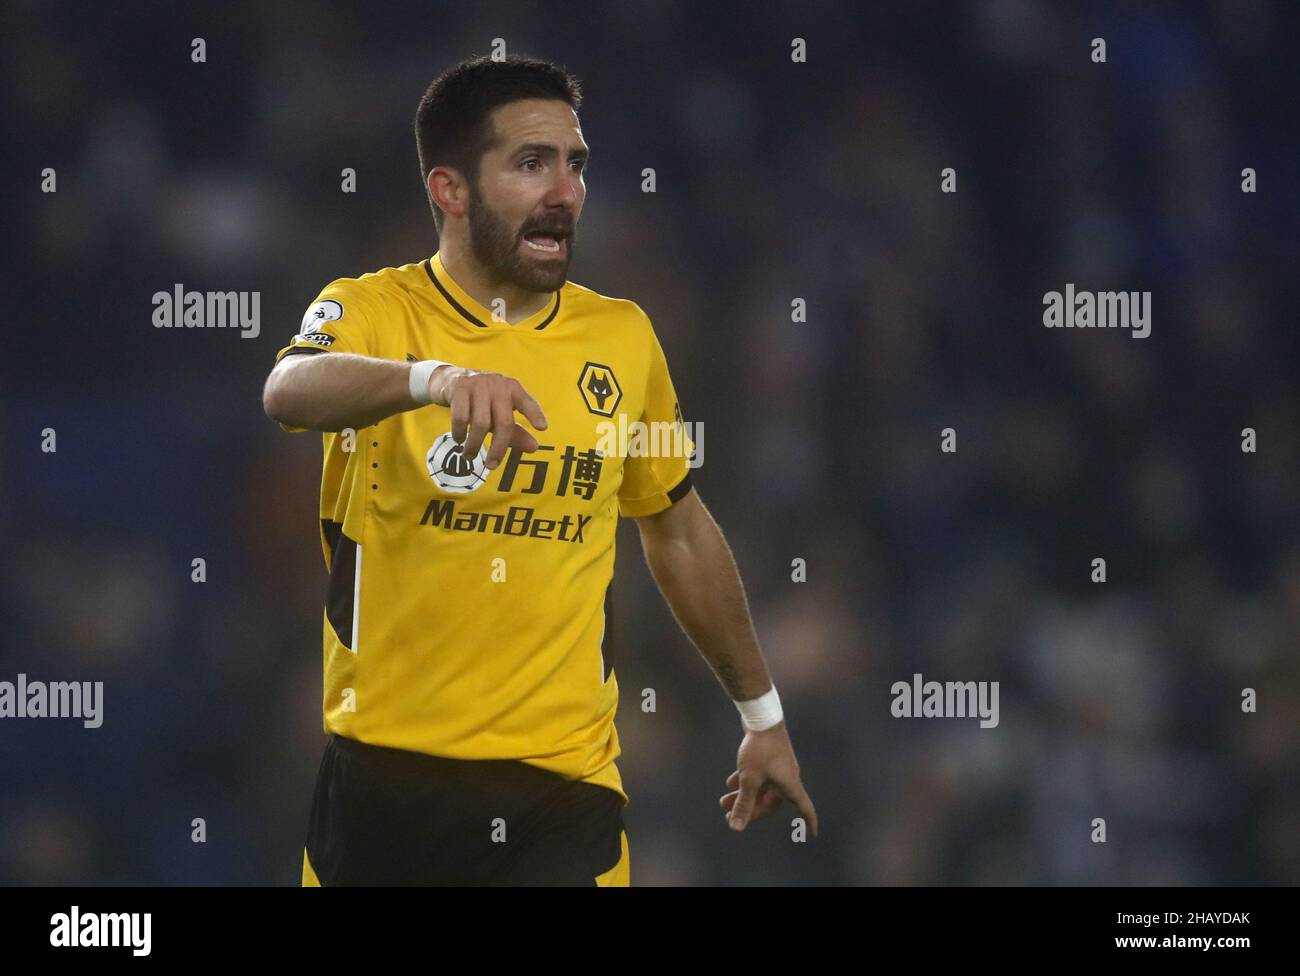 Brighton and Hove, England, 15th December 2021. João Moutinho of Wolverhampton Wanderers during the Premier League match at the AMEX Stadium, Brighton and Hove. Picture credit should read: Paul Terry / Sportimage Stock Photo